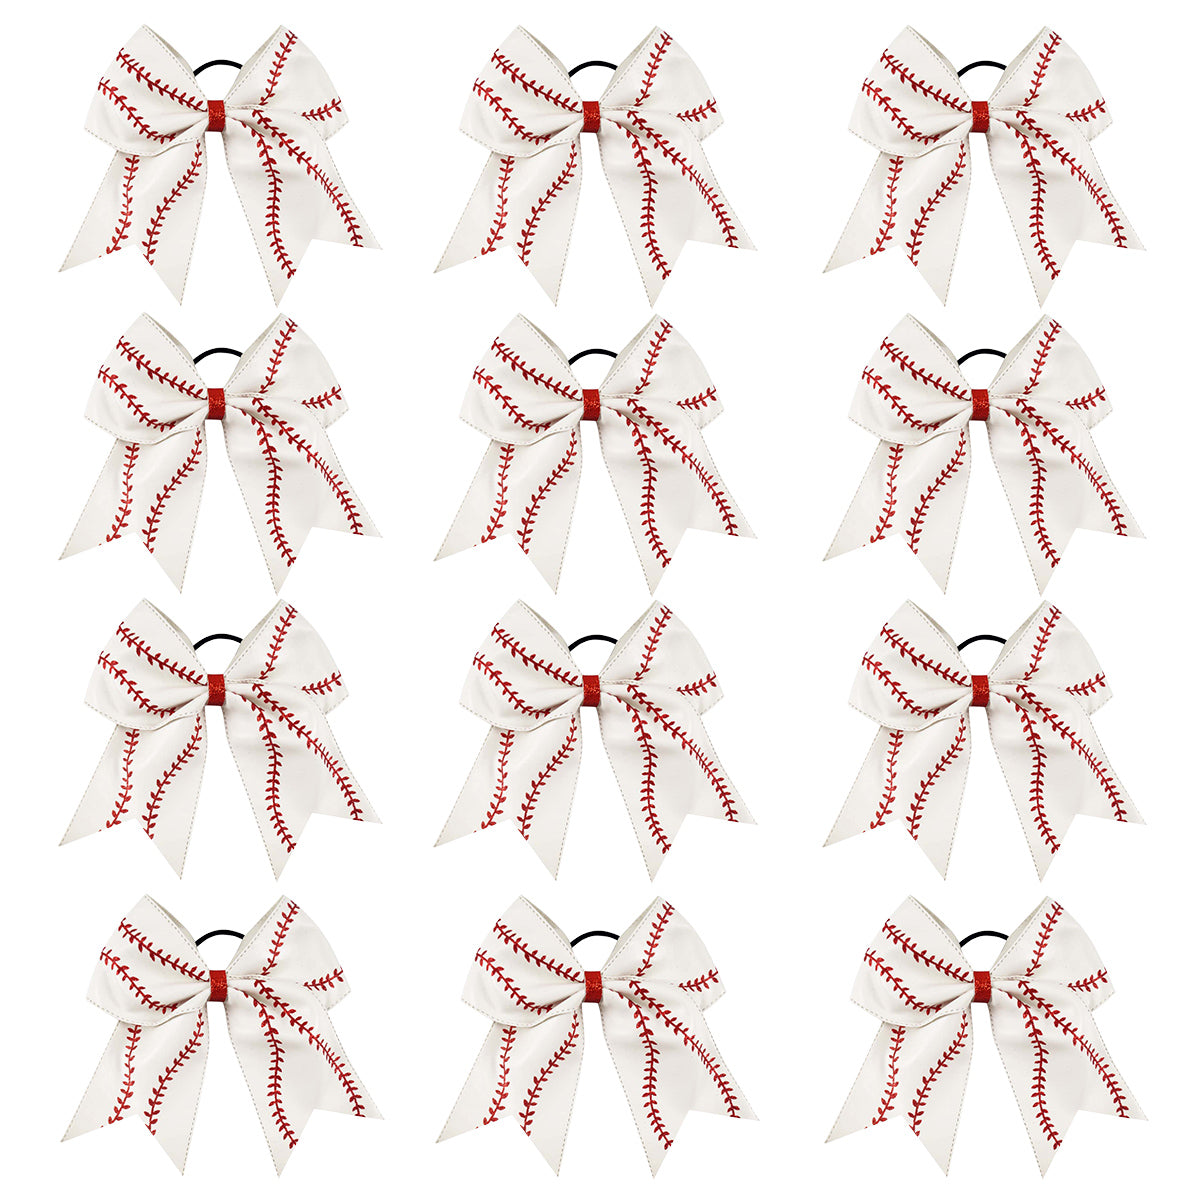 Cheer Hair Bows Large with Ponytail Holder White